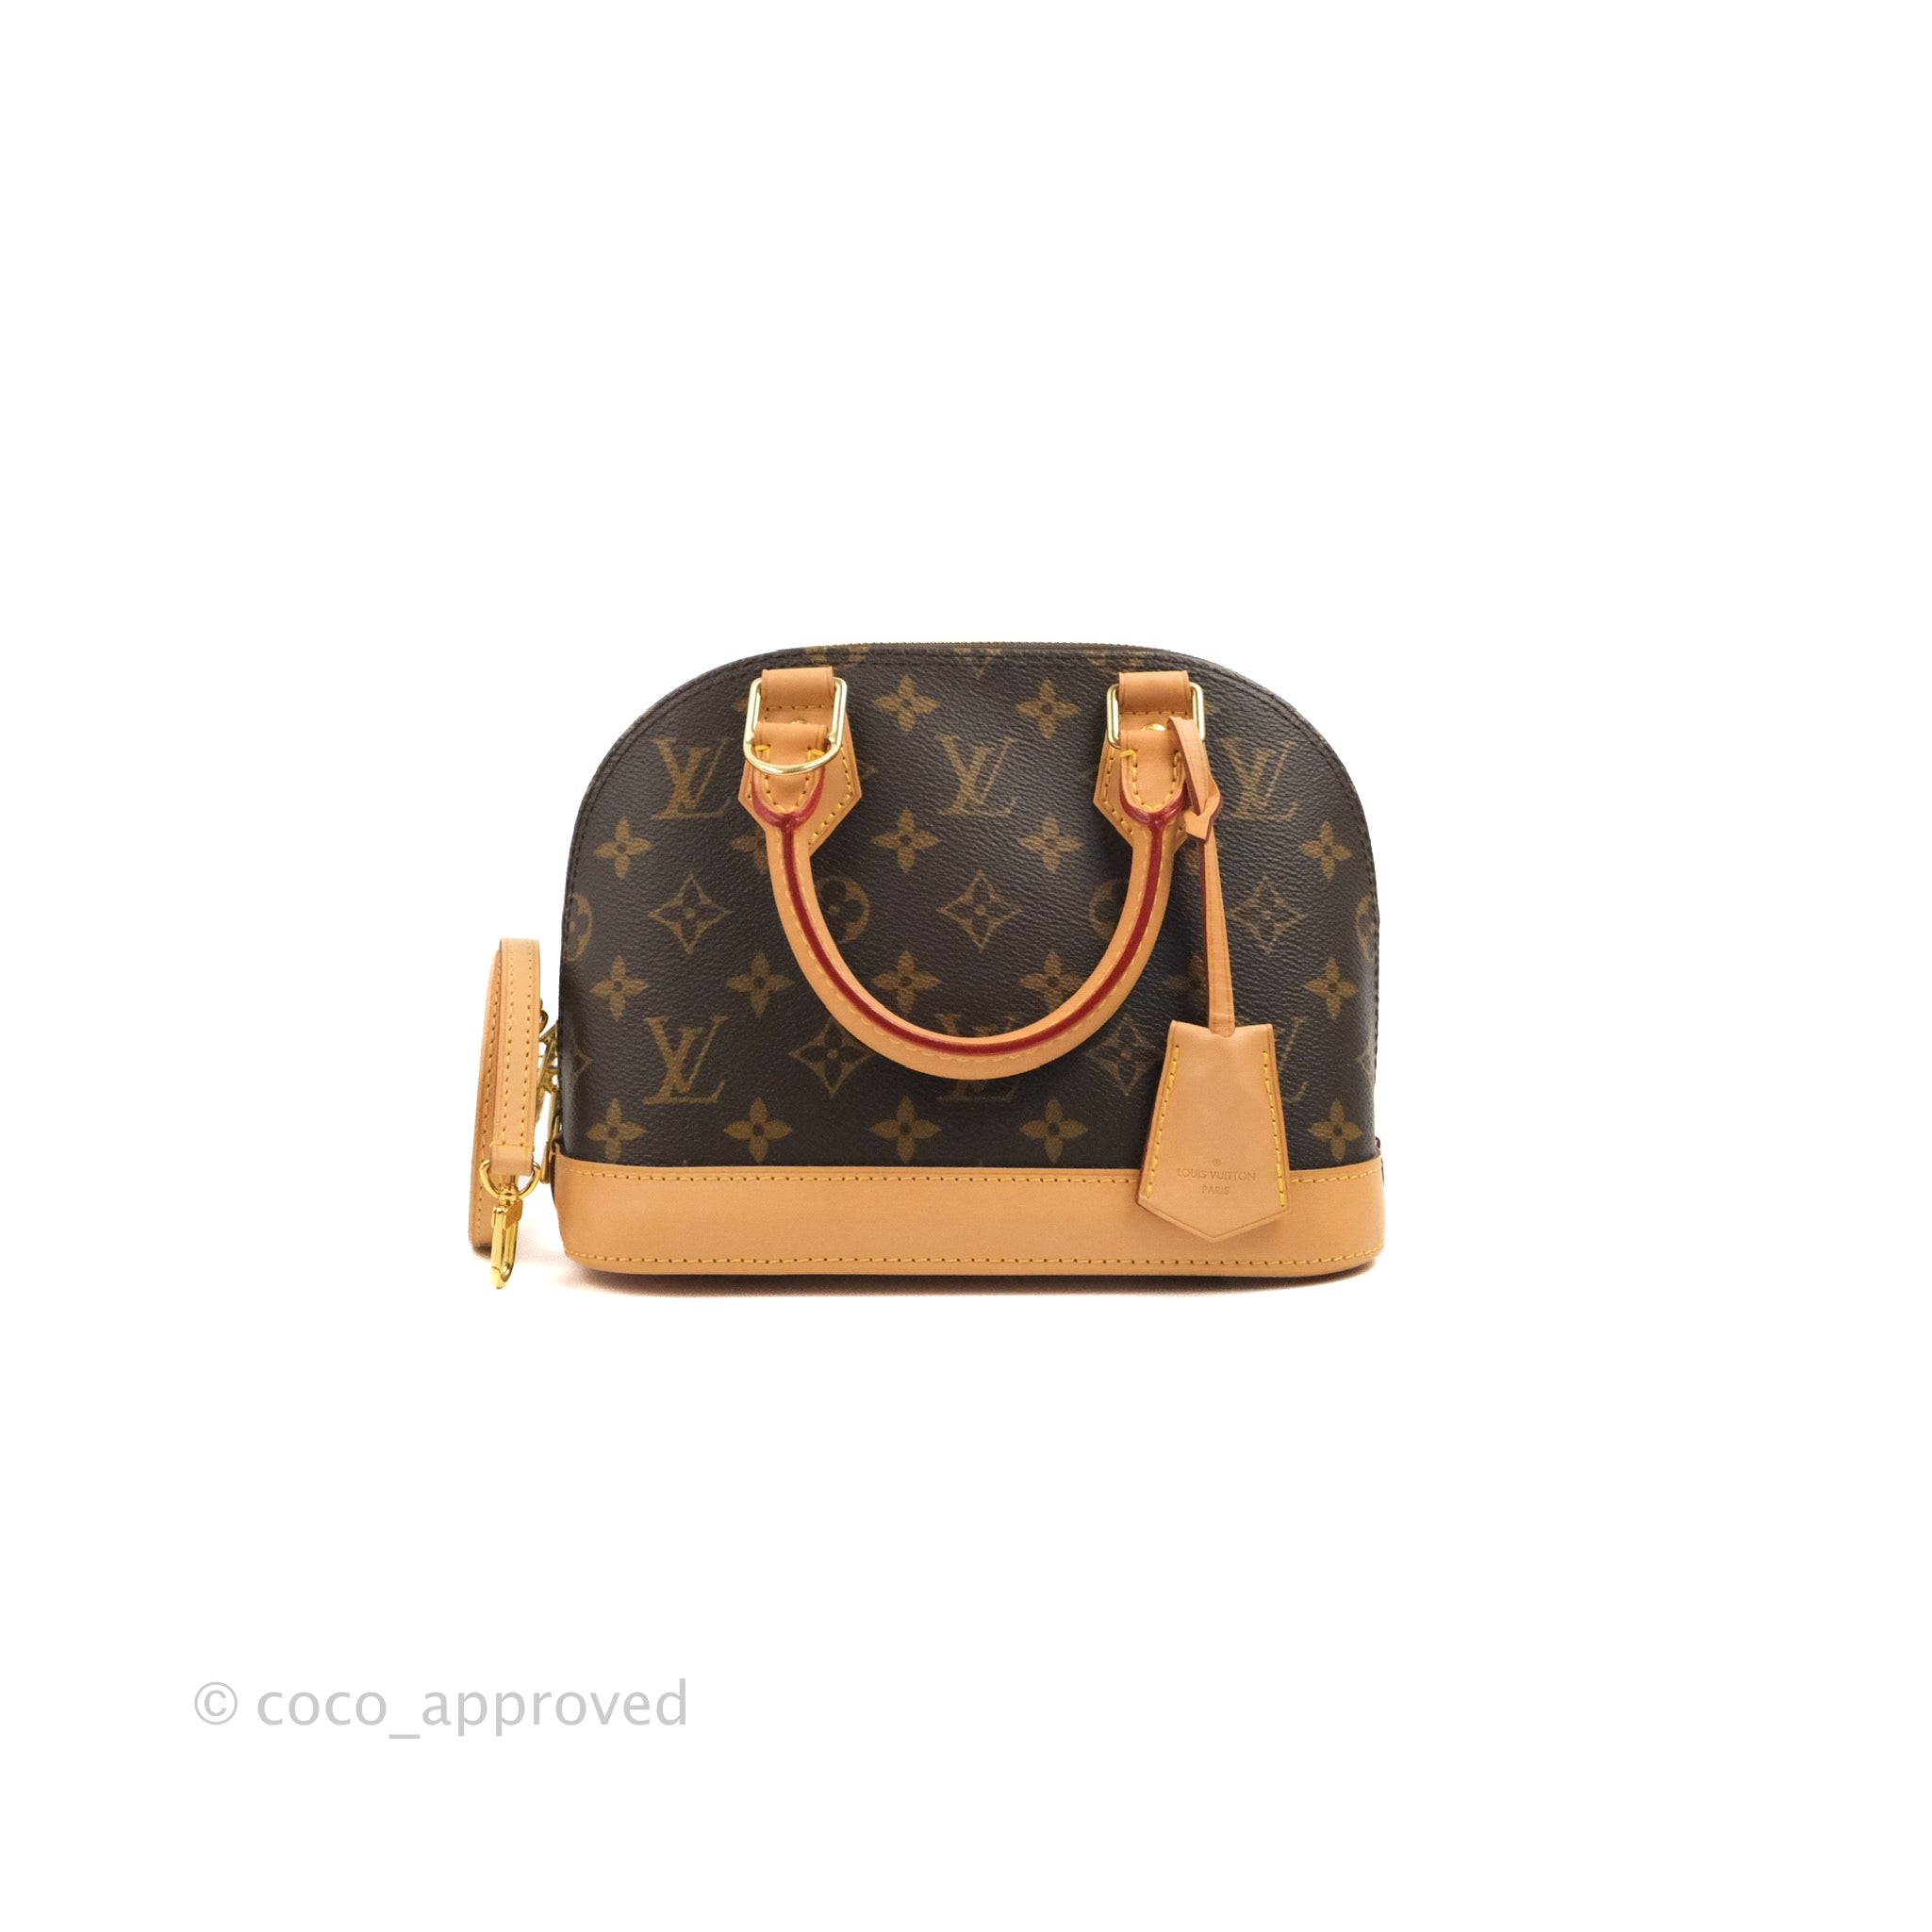 Sold at Auction: Louis Vuitton Mini Alma BB bag, lacquered leather